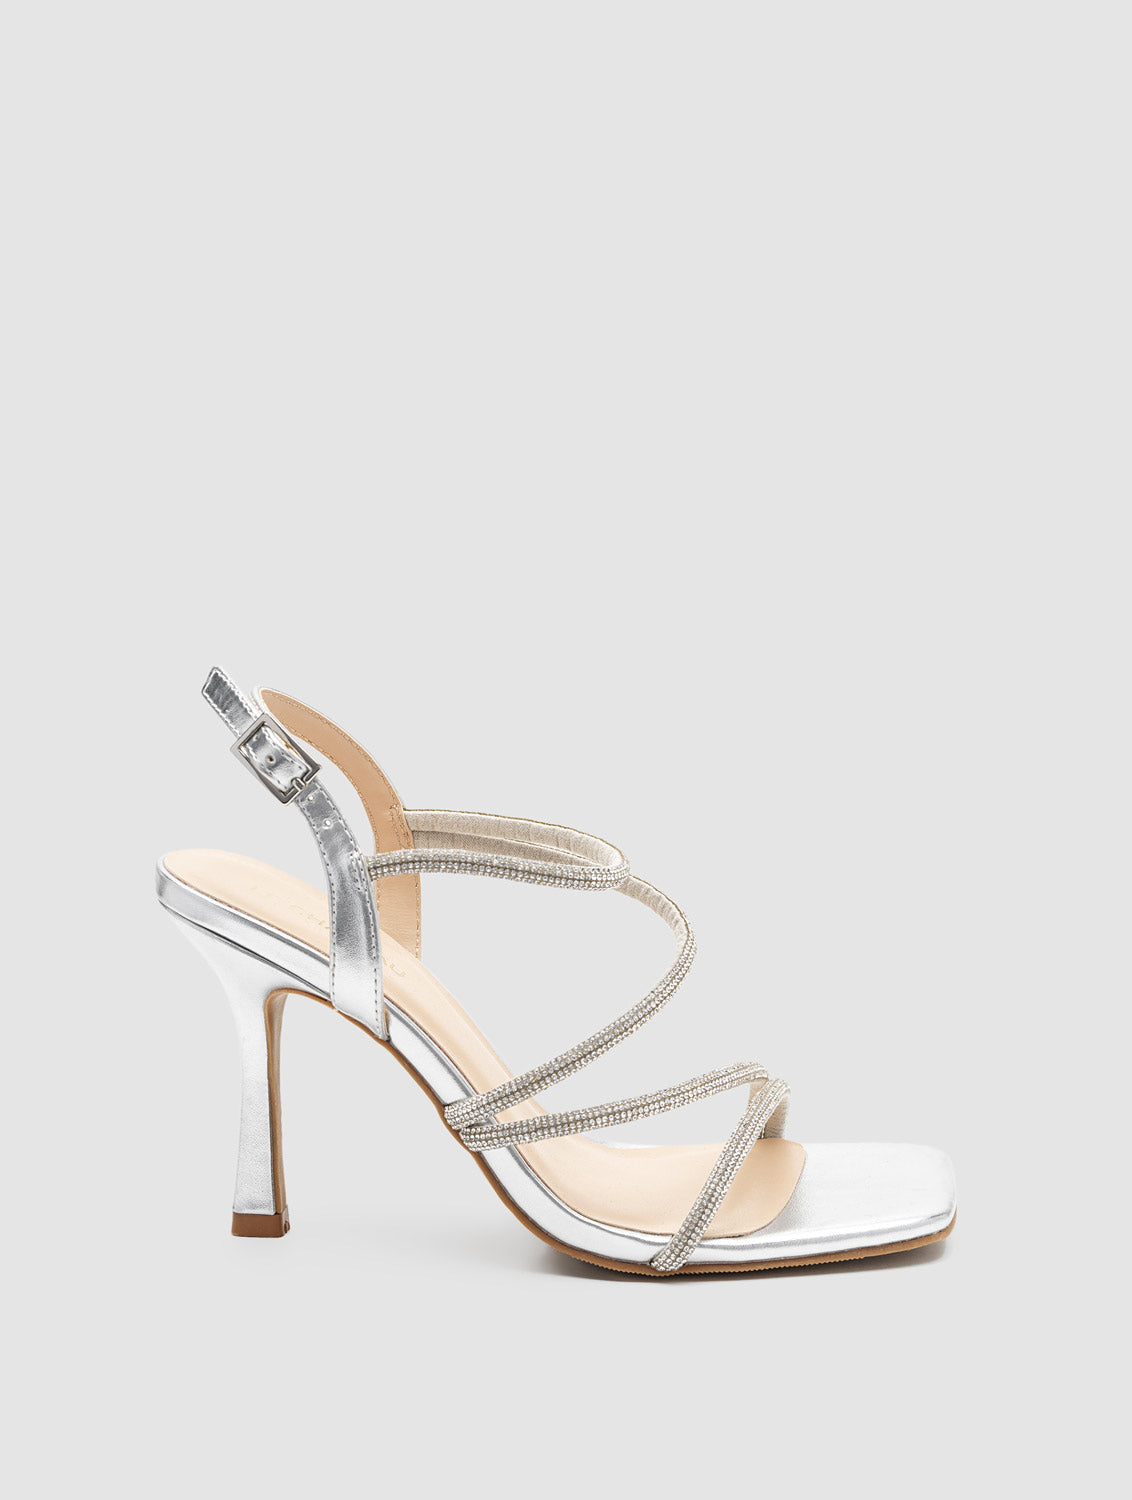 Square Toe High Heel Strappy Sandal With Rhinestones – Suzy Shier